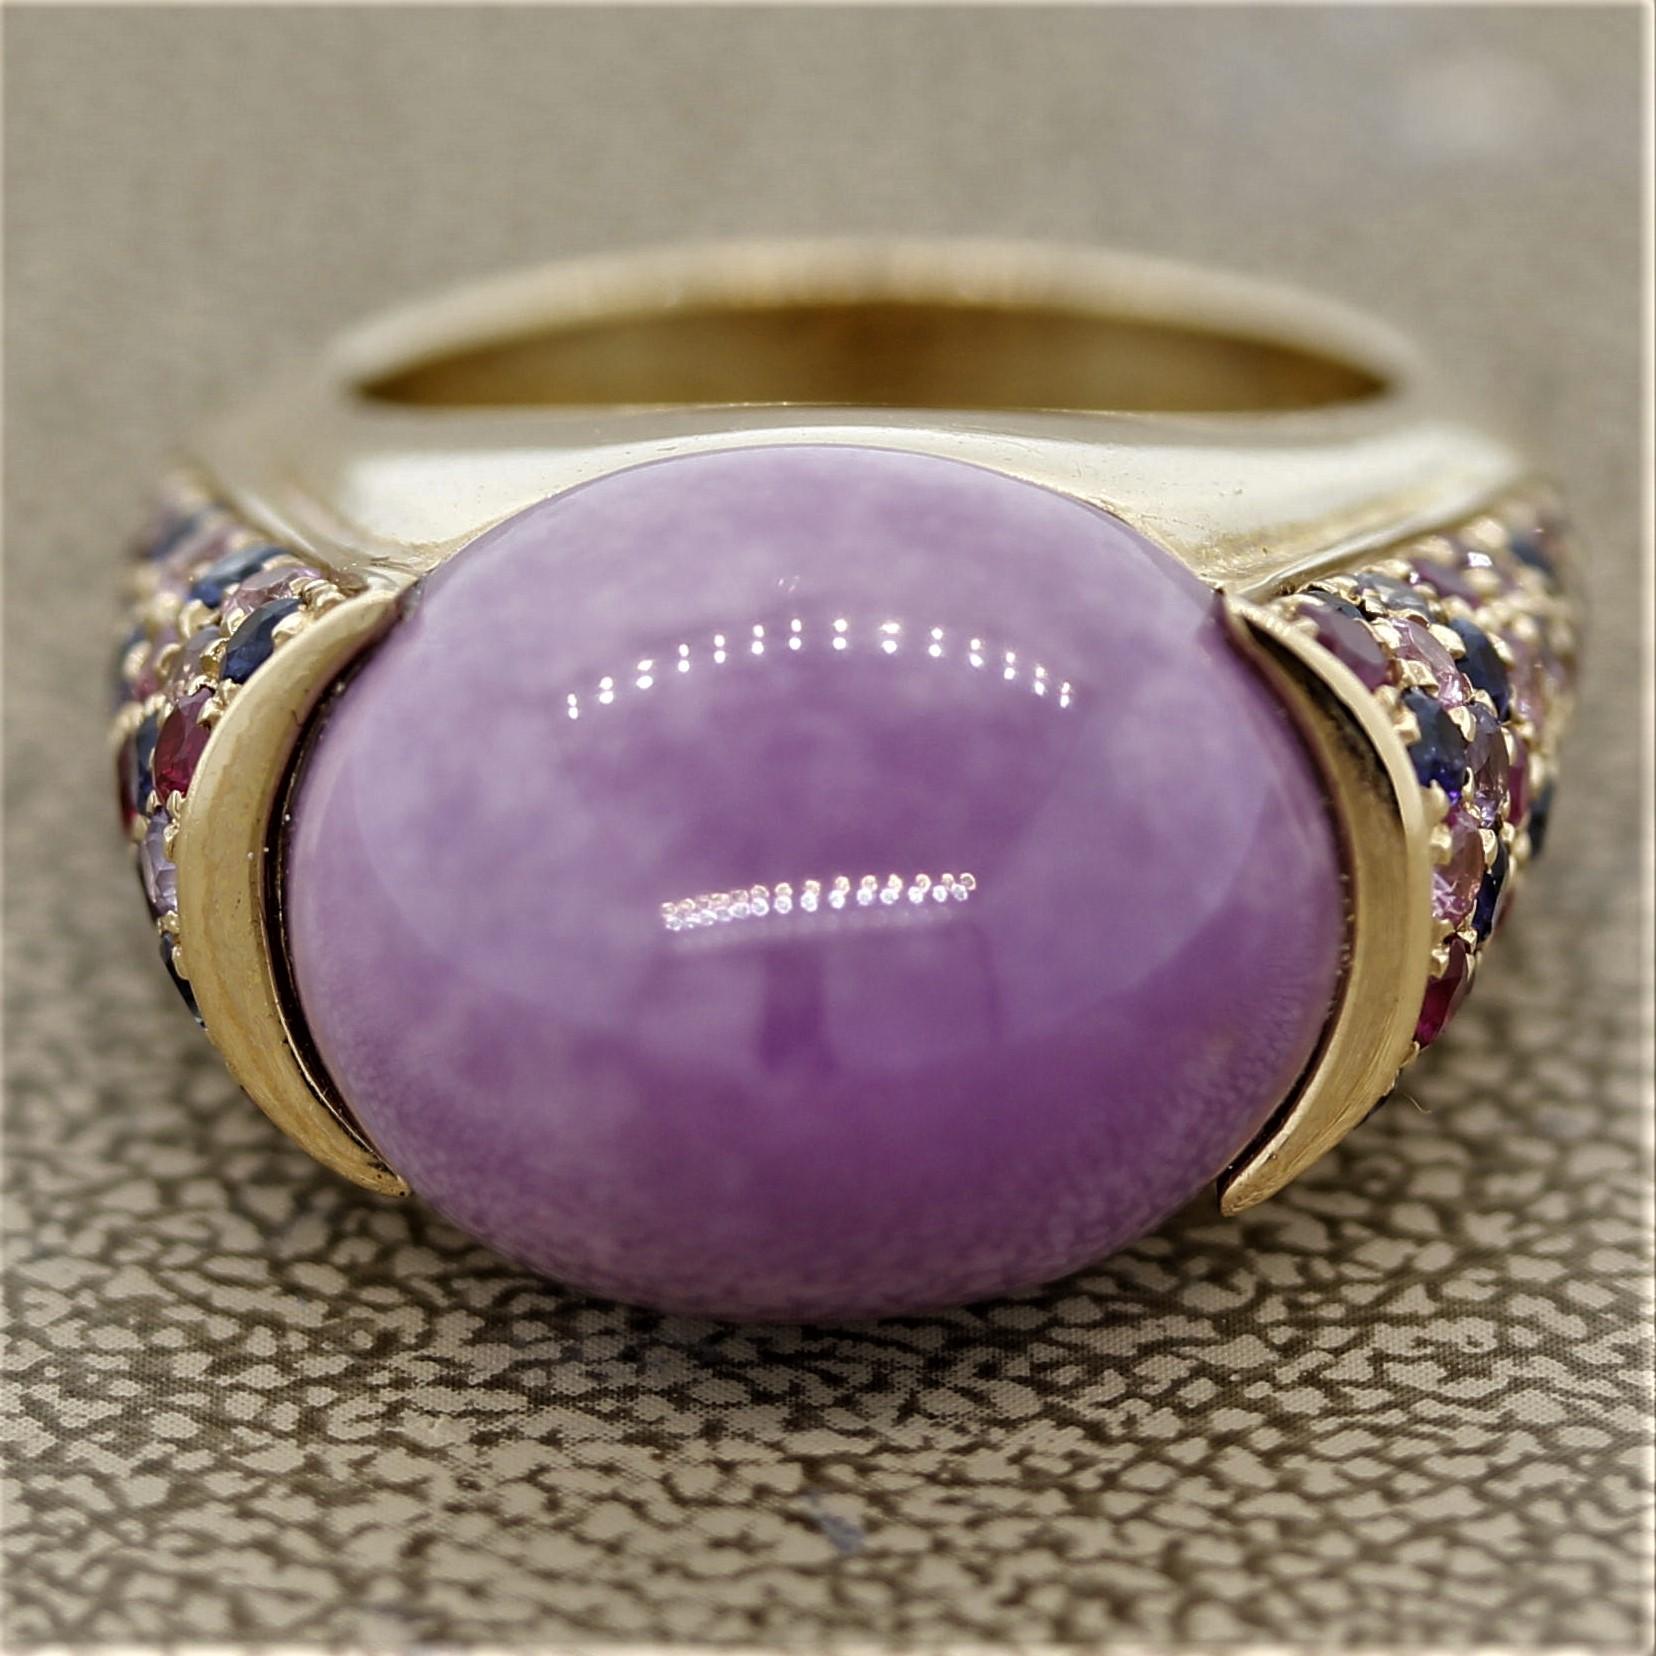 A lovely domed ring hand-crafted in Italy. It features a natural 17.50 carat cabochon jadeite jade with a luscious lavender color. It is accented by 1.90 carats of round cut rubies and multi-color sapphires set on the shoulders of the ring. Expertly